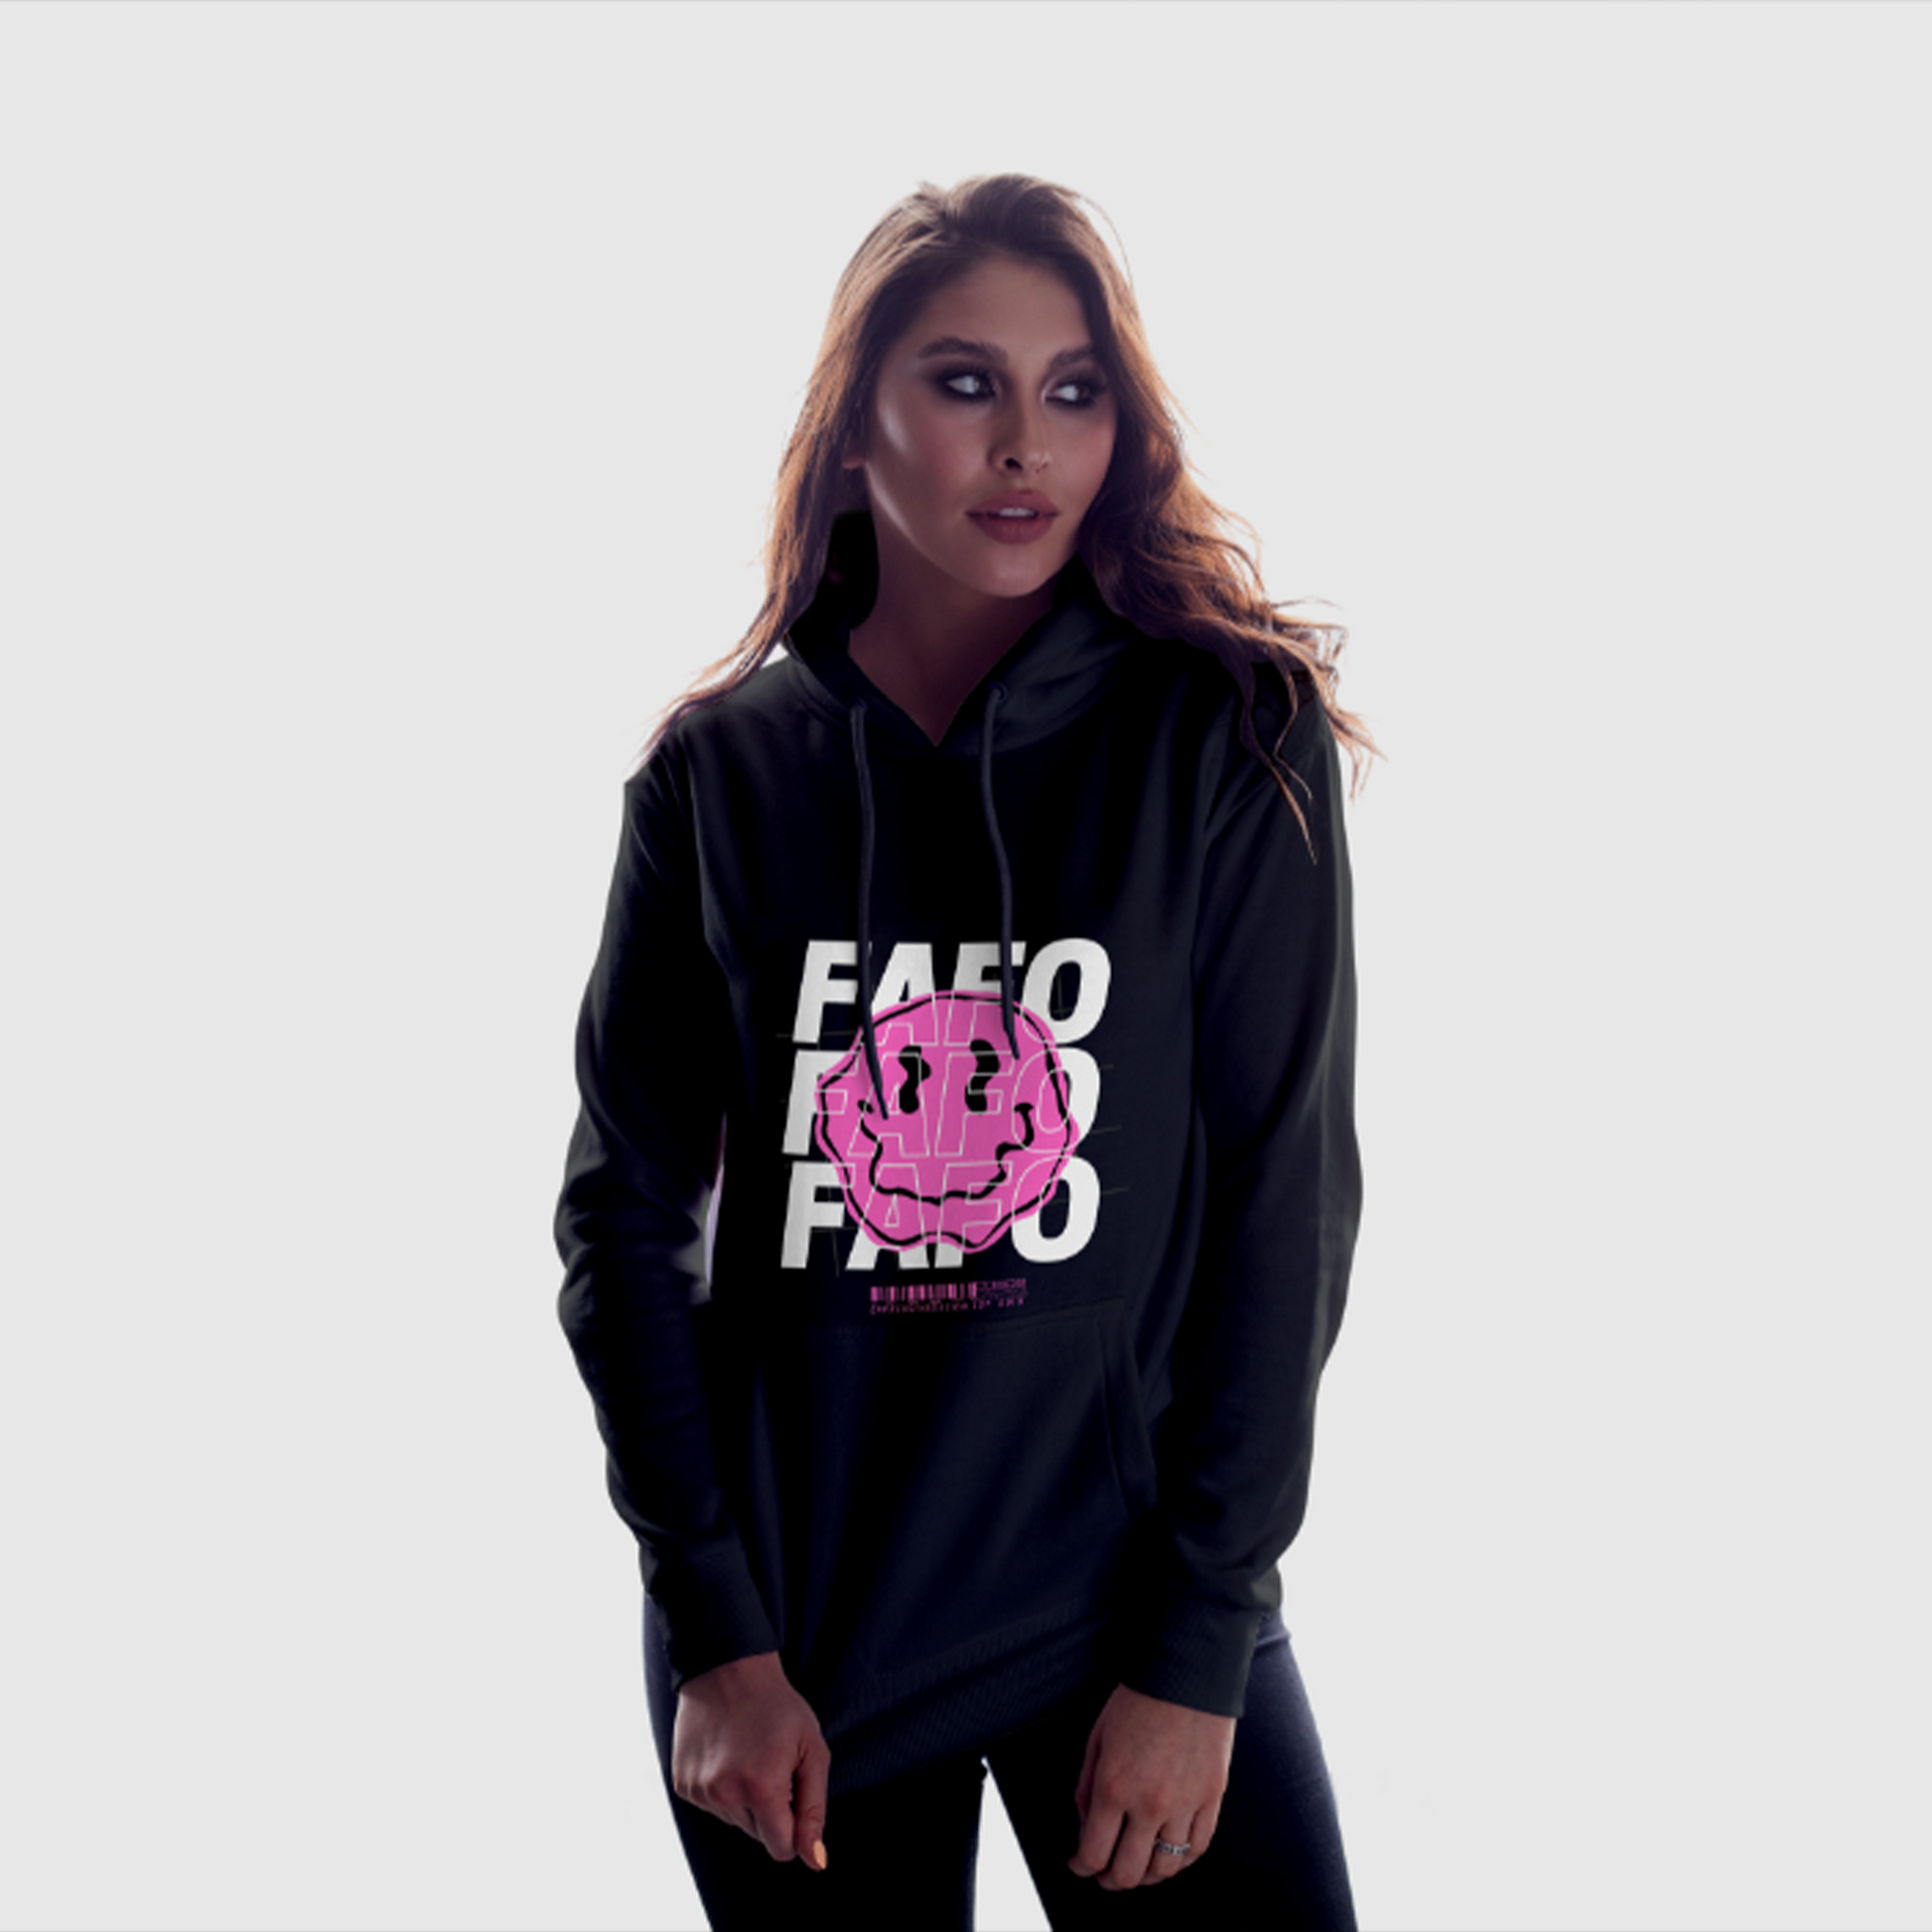 Pink White FAFO Smiley Face Positive Pullover Hoodie - Black - Expressive DeZien 